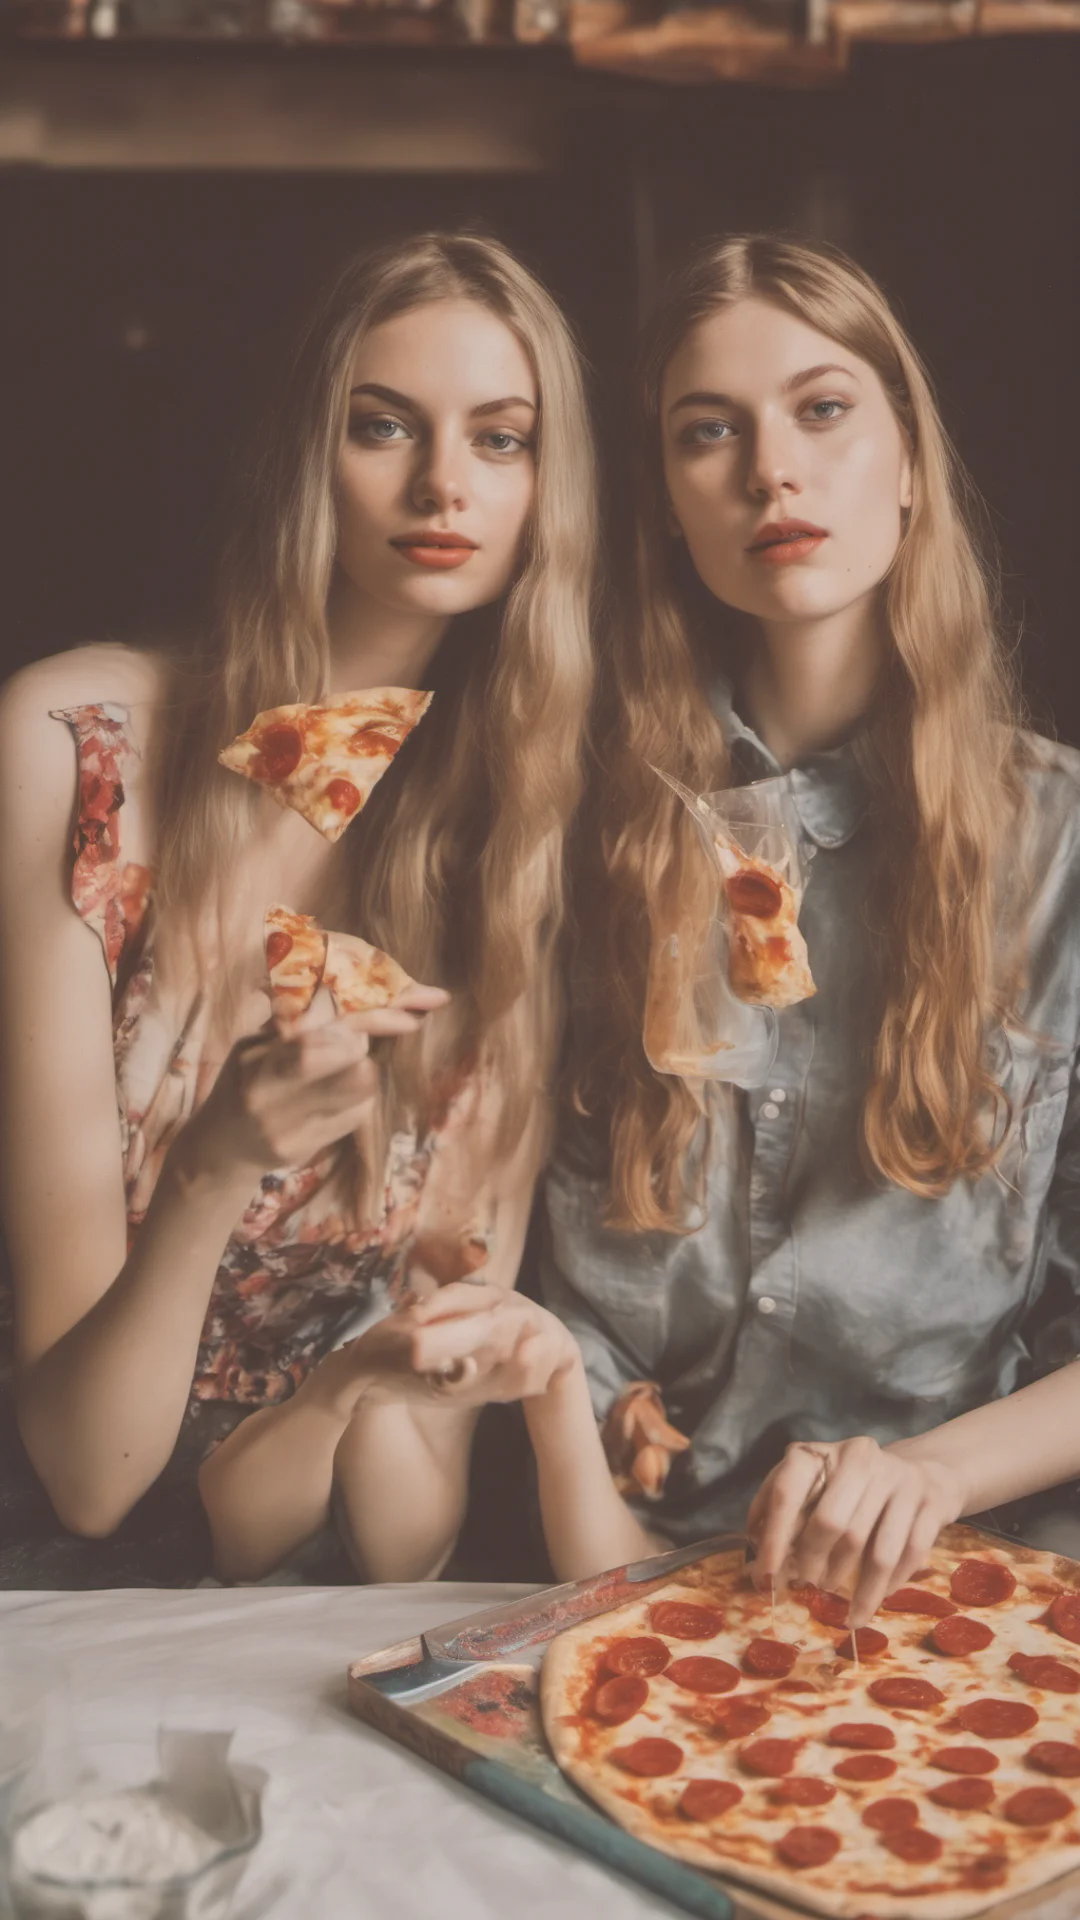 aipolaroid style image of two sensual german girls  22 yo   sharing a dr. oetker pizza ing confident engaging wow artstation art 3 tall